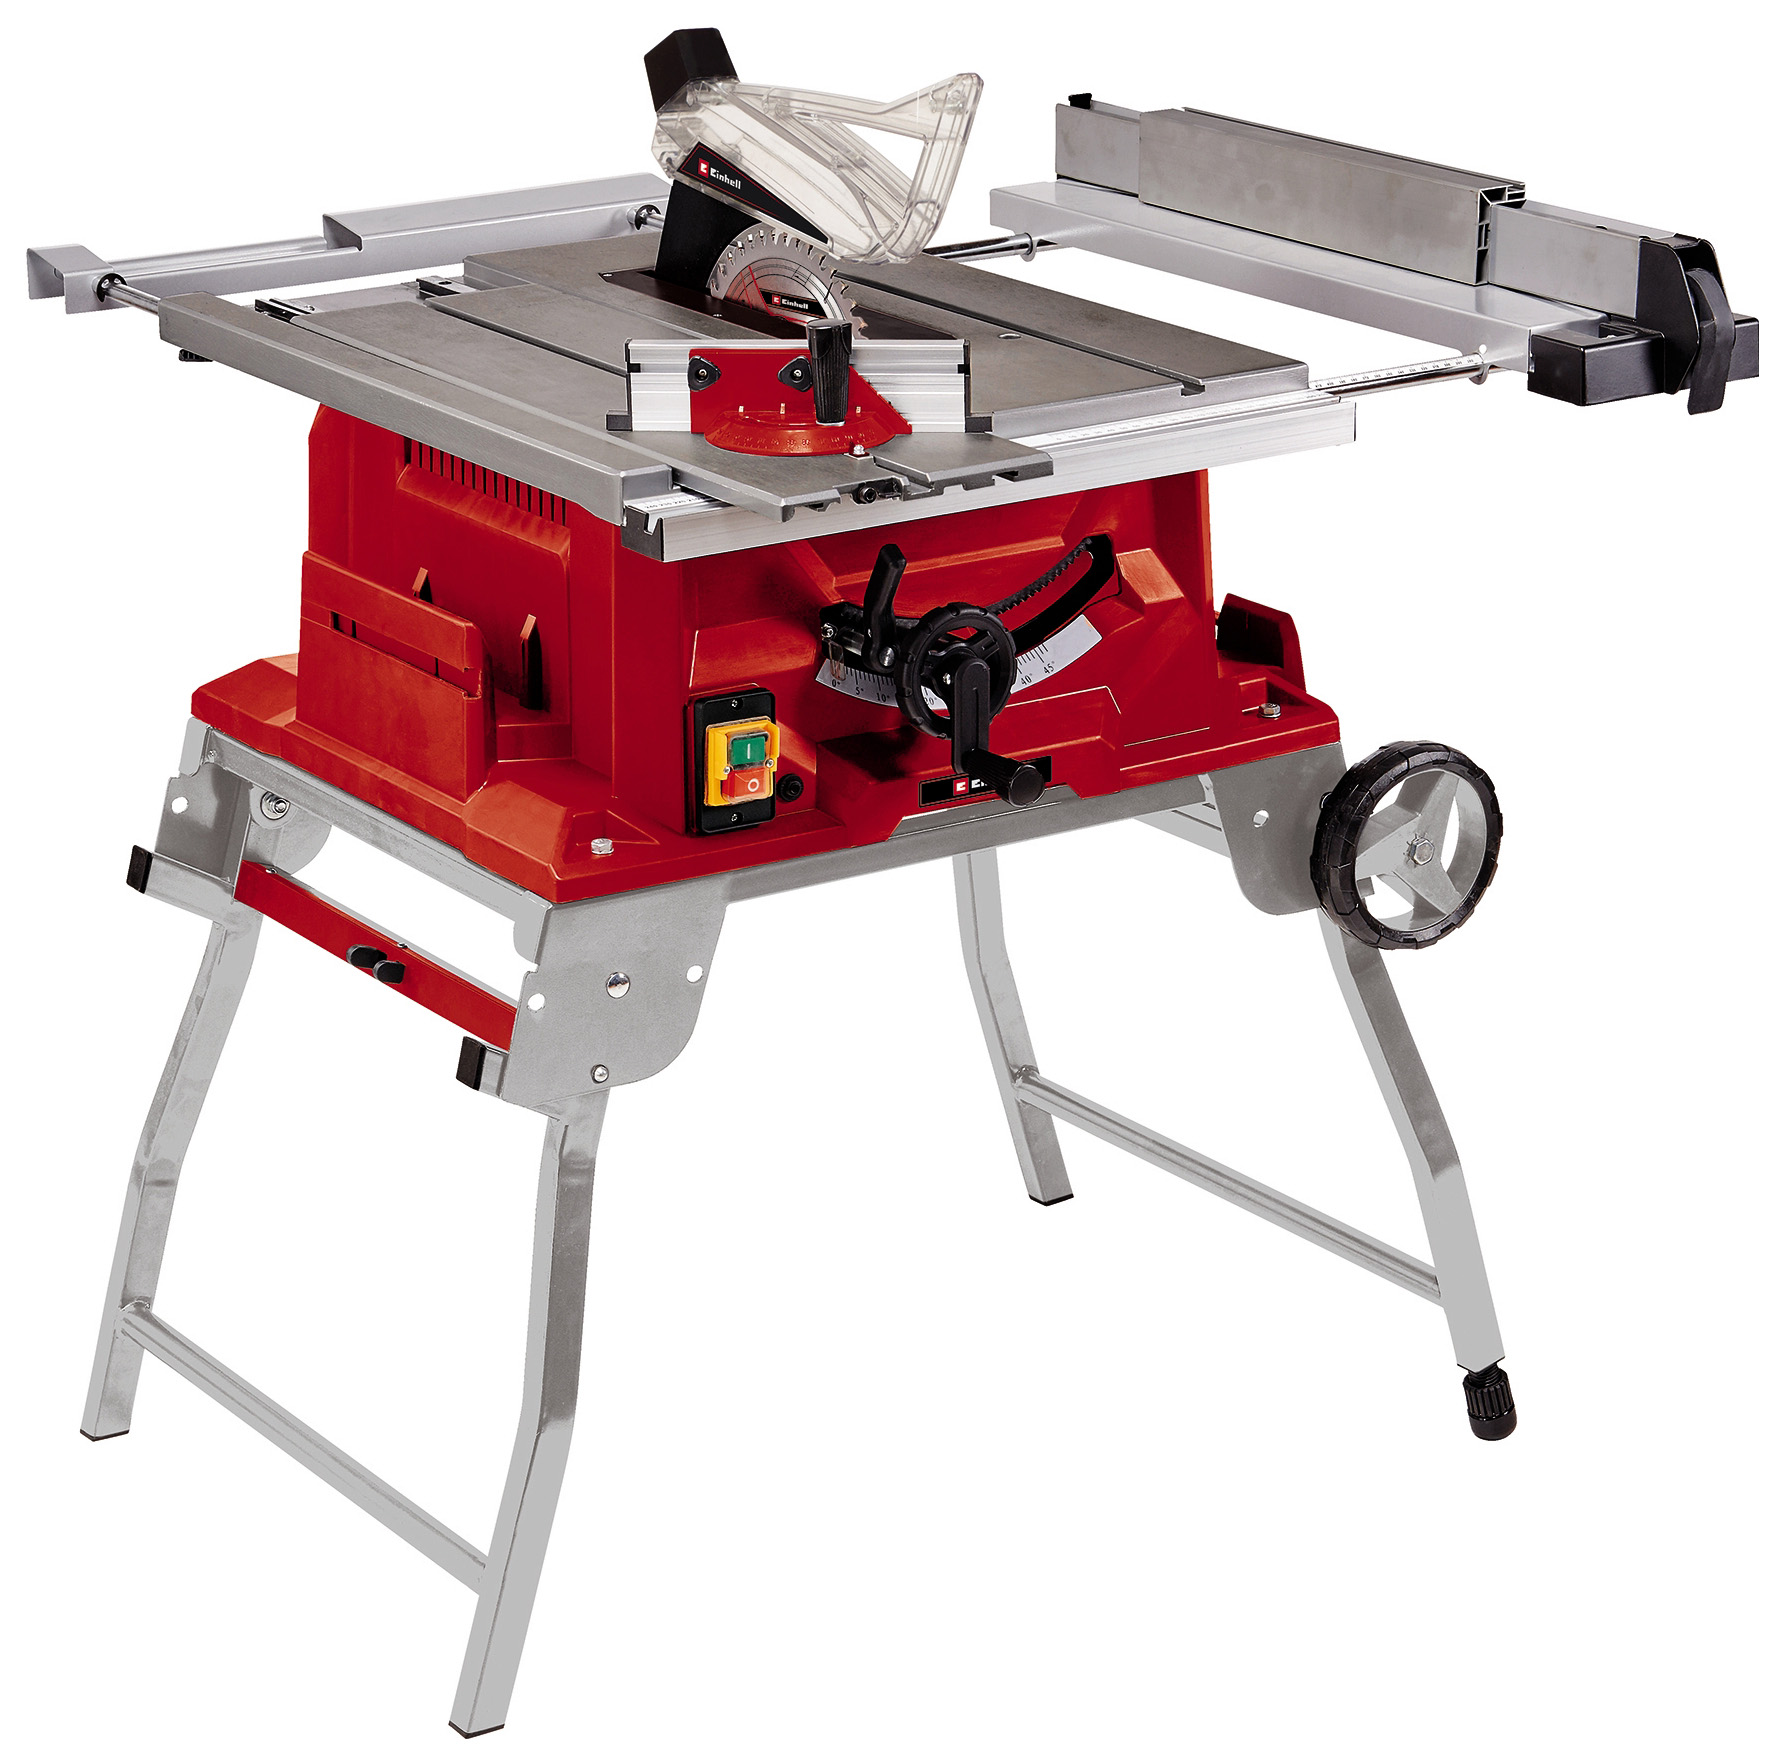 Einhell TE-CC 250 UF 250mm Corded Portable Foldable Table Saw - 2000W